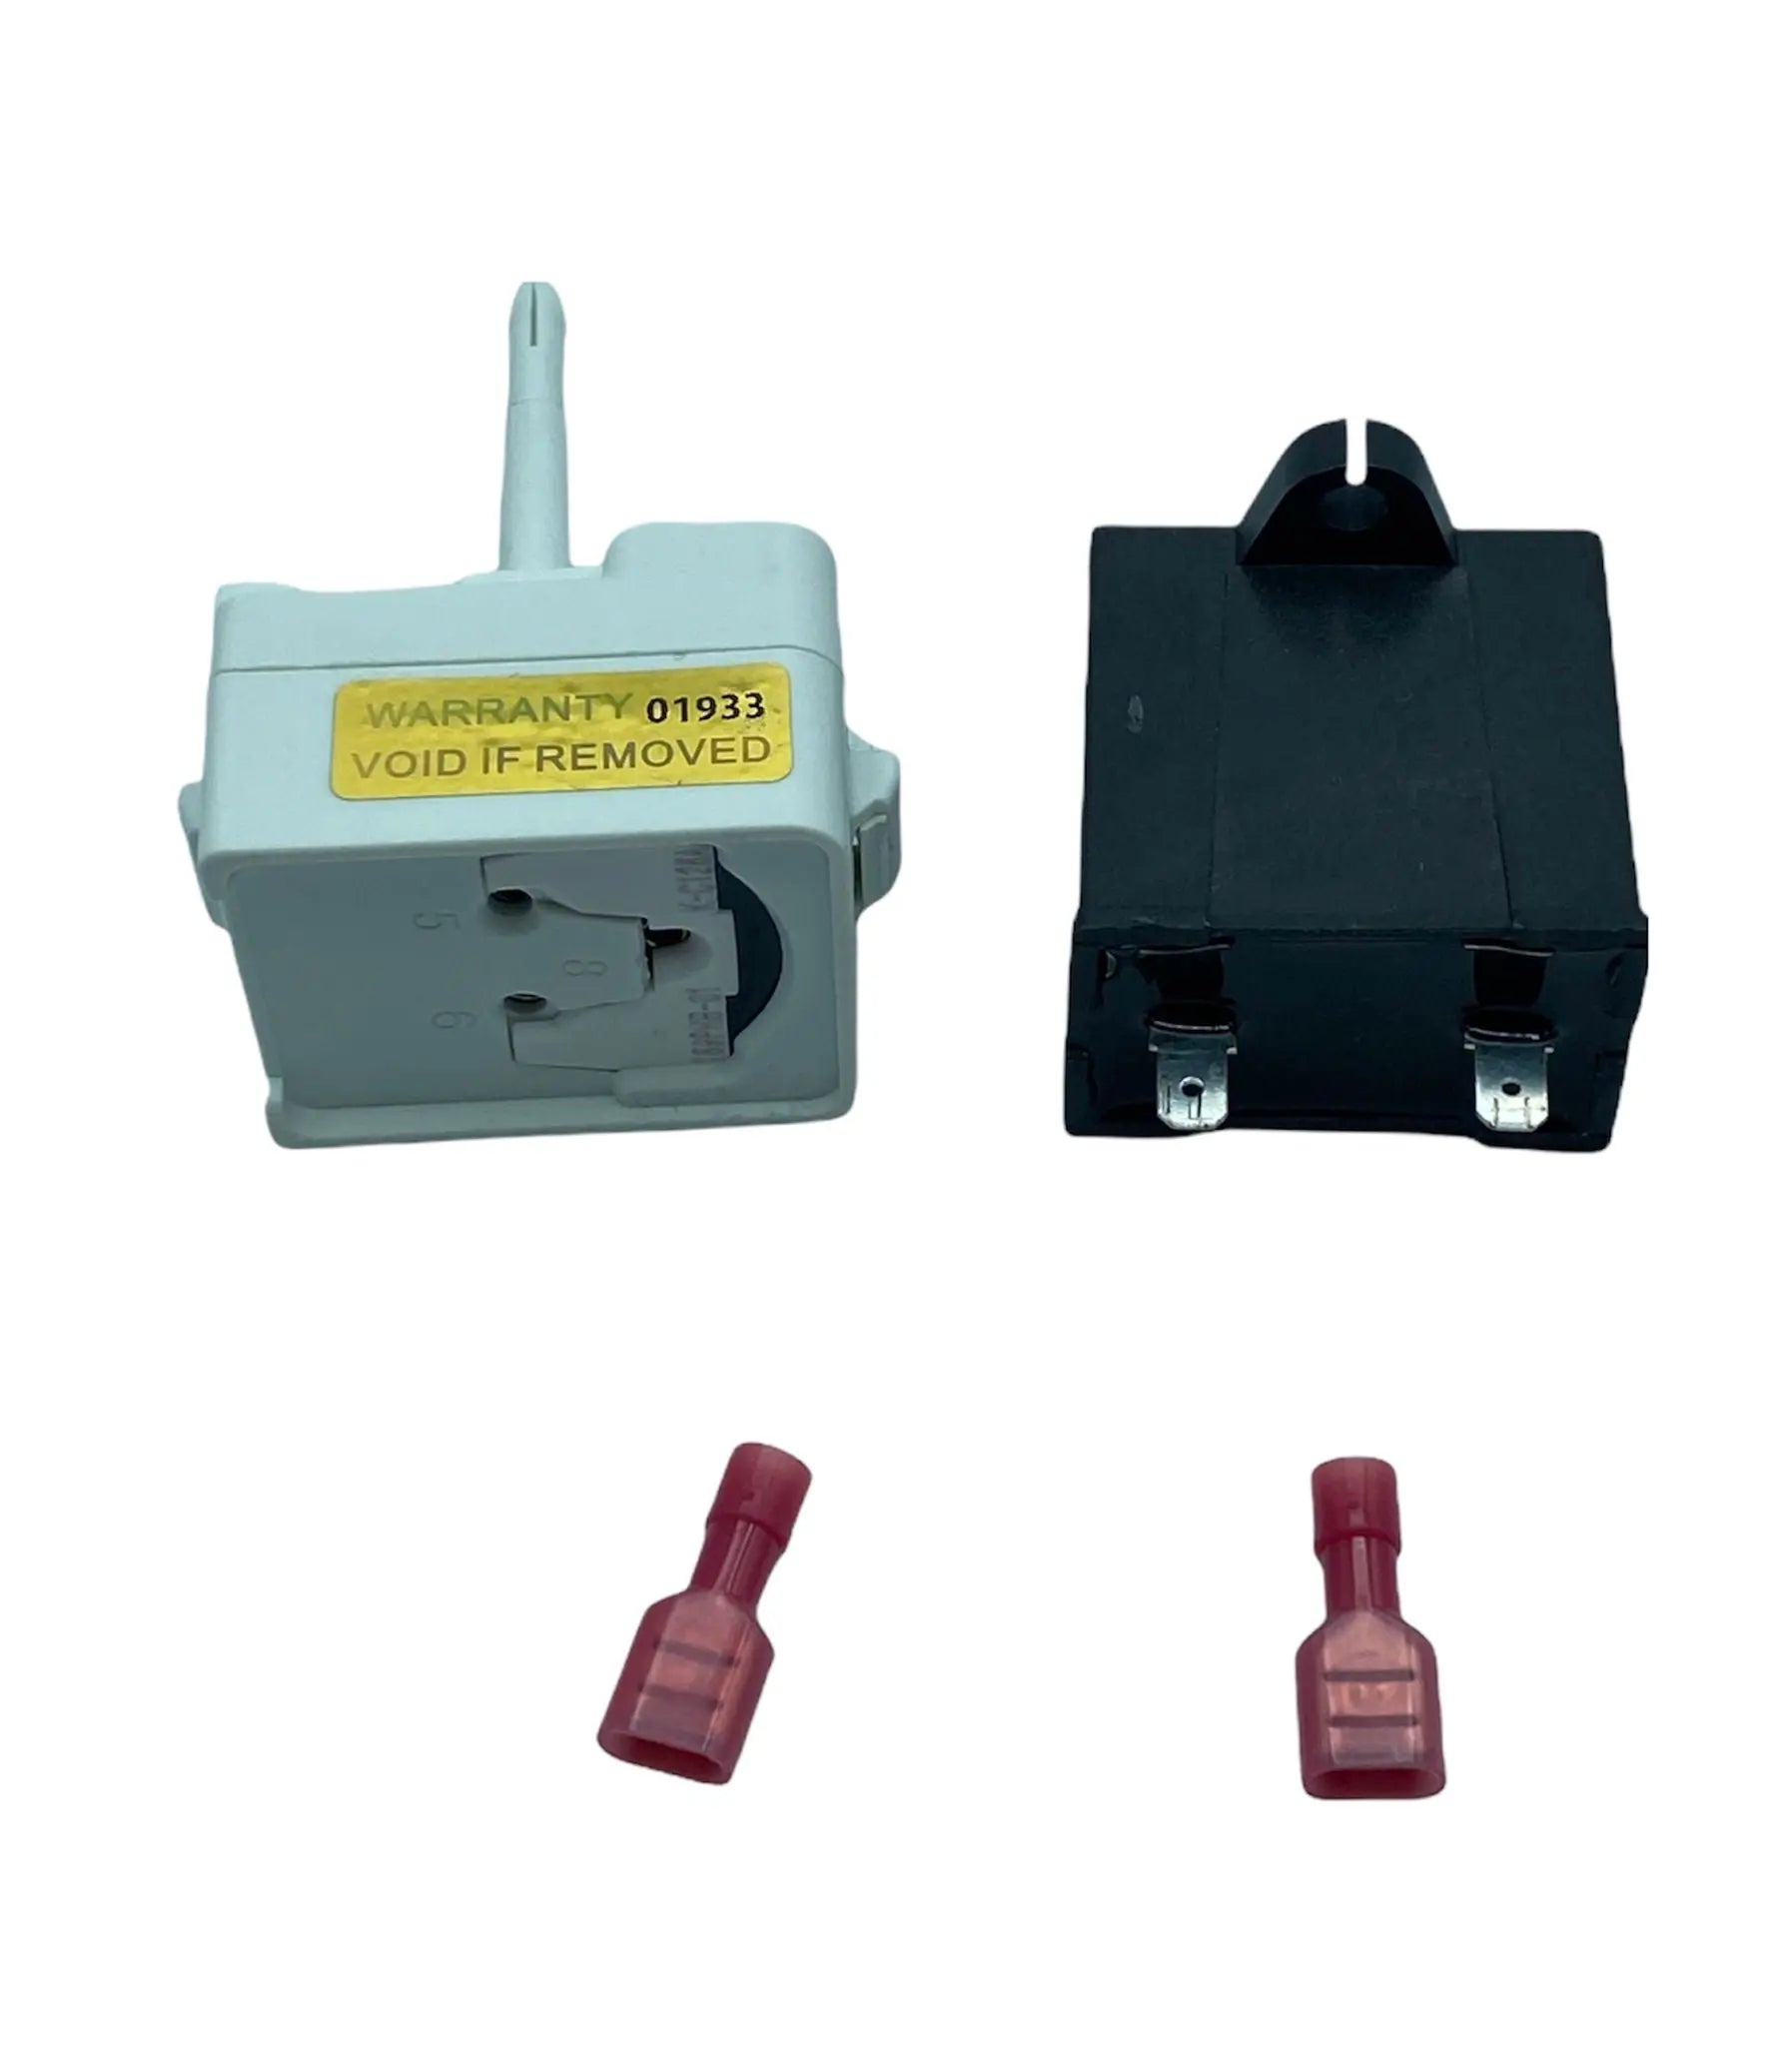 G.E Refrigerator Start Device Kit - WR01L03291 or WR09X10105 ,  REPLACES: WR08X10066  WR09X10081 1091666  EA963863  PS963863  AP3772846  PD00029698 INVERTEC